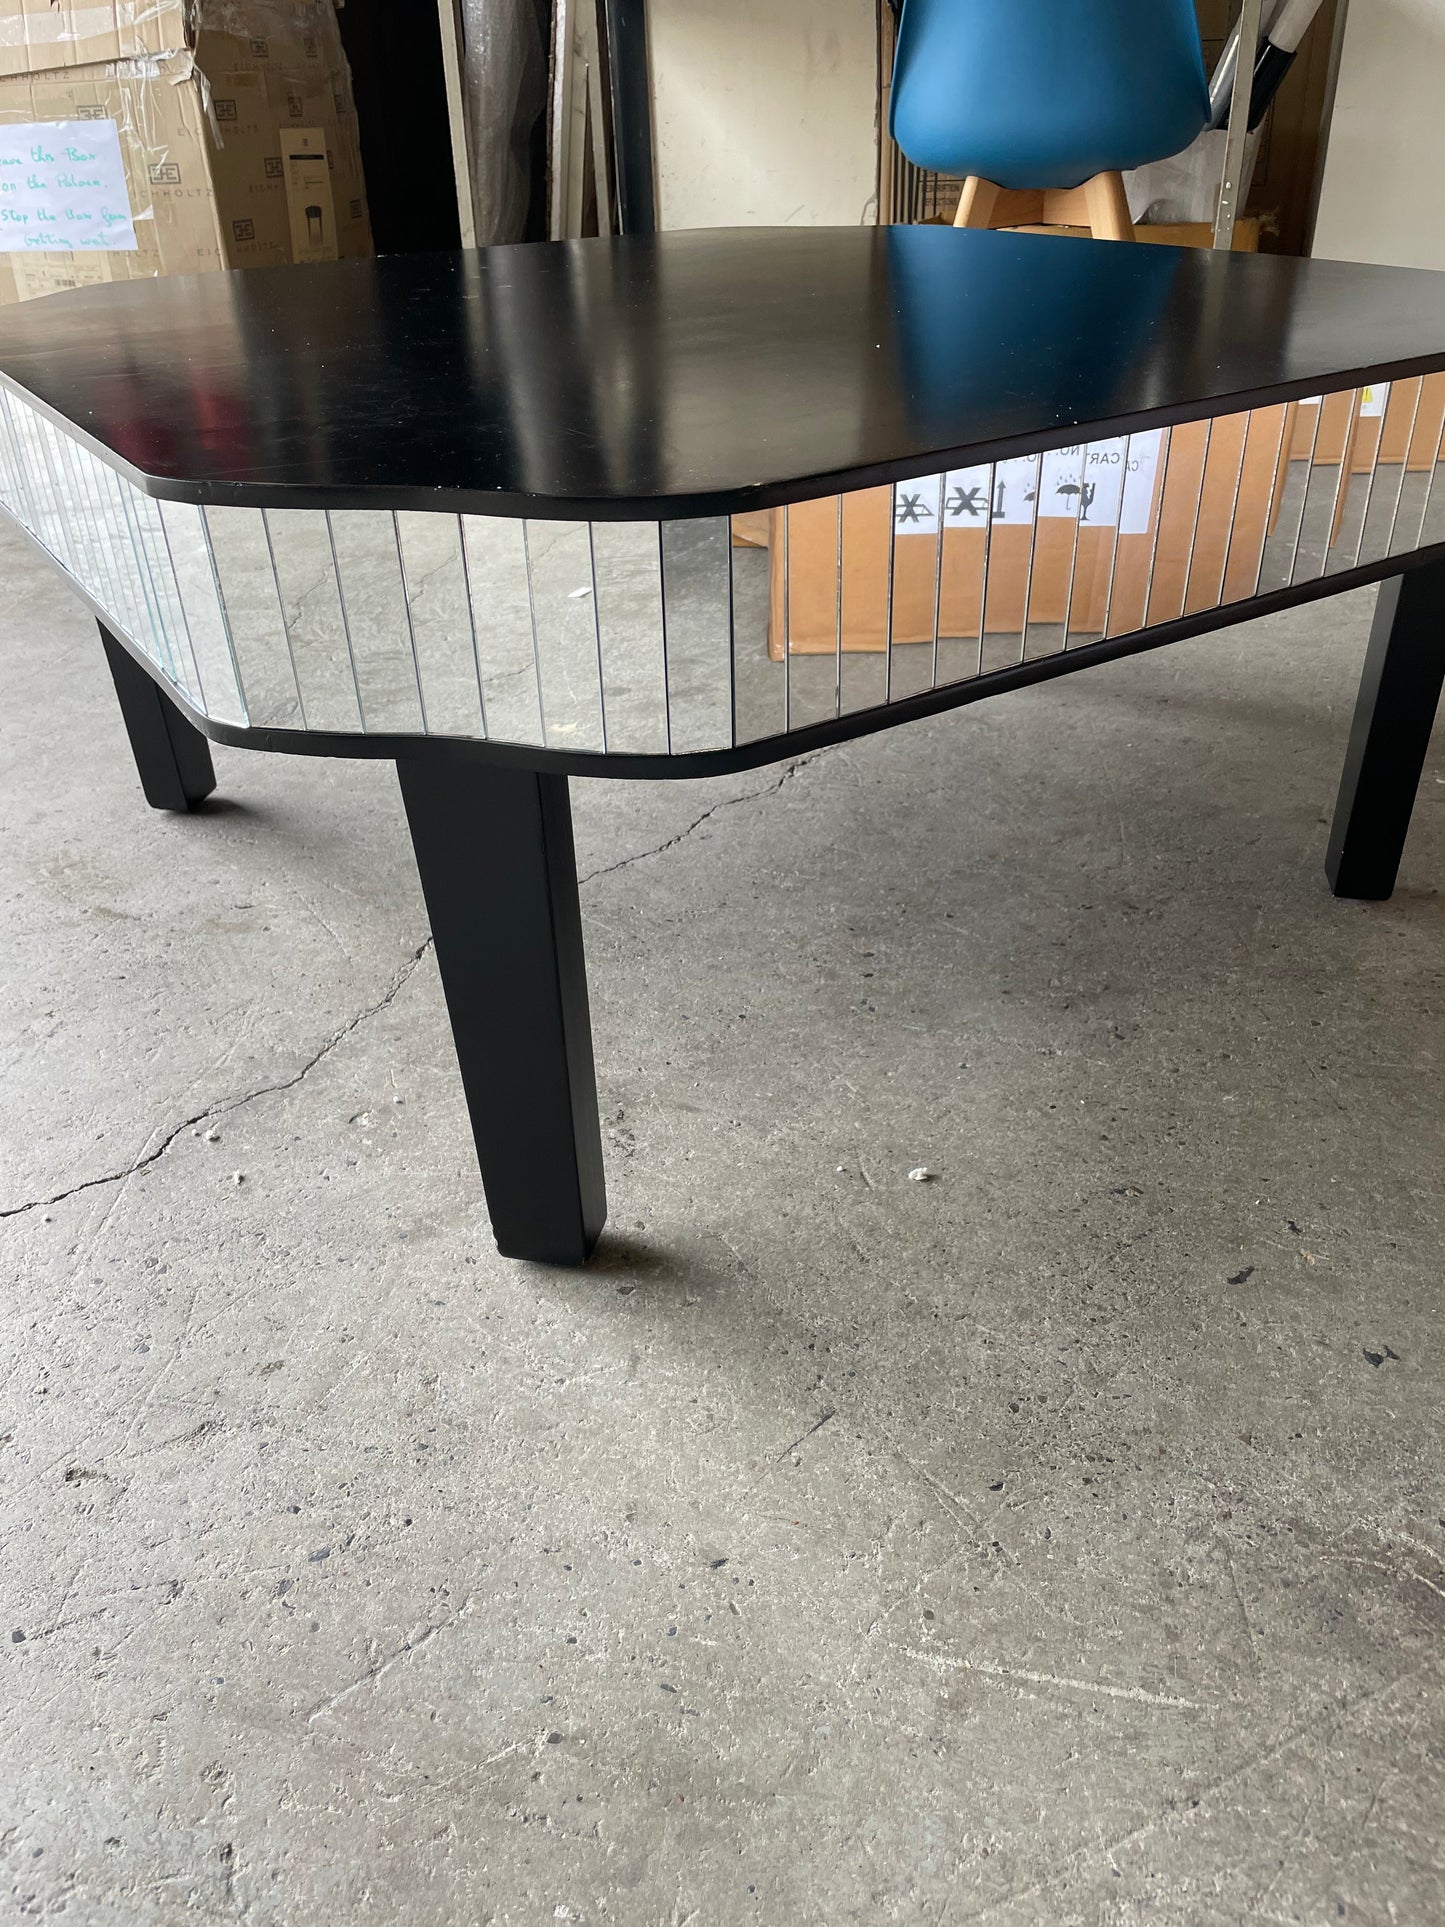 Clavier Side Table with mirrored sides REDUCED TO CLEAR TODAY ! collection only